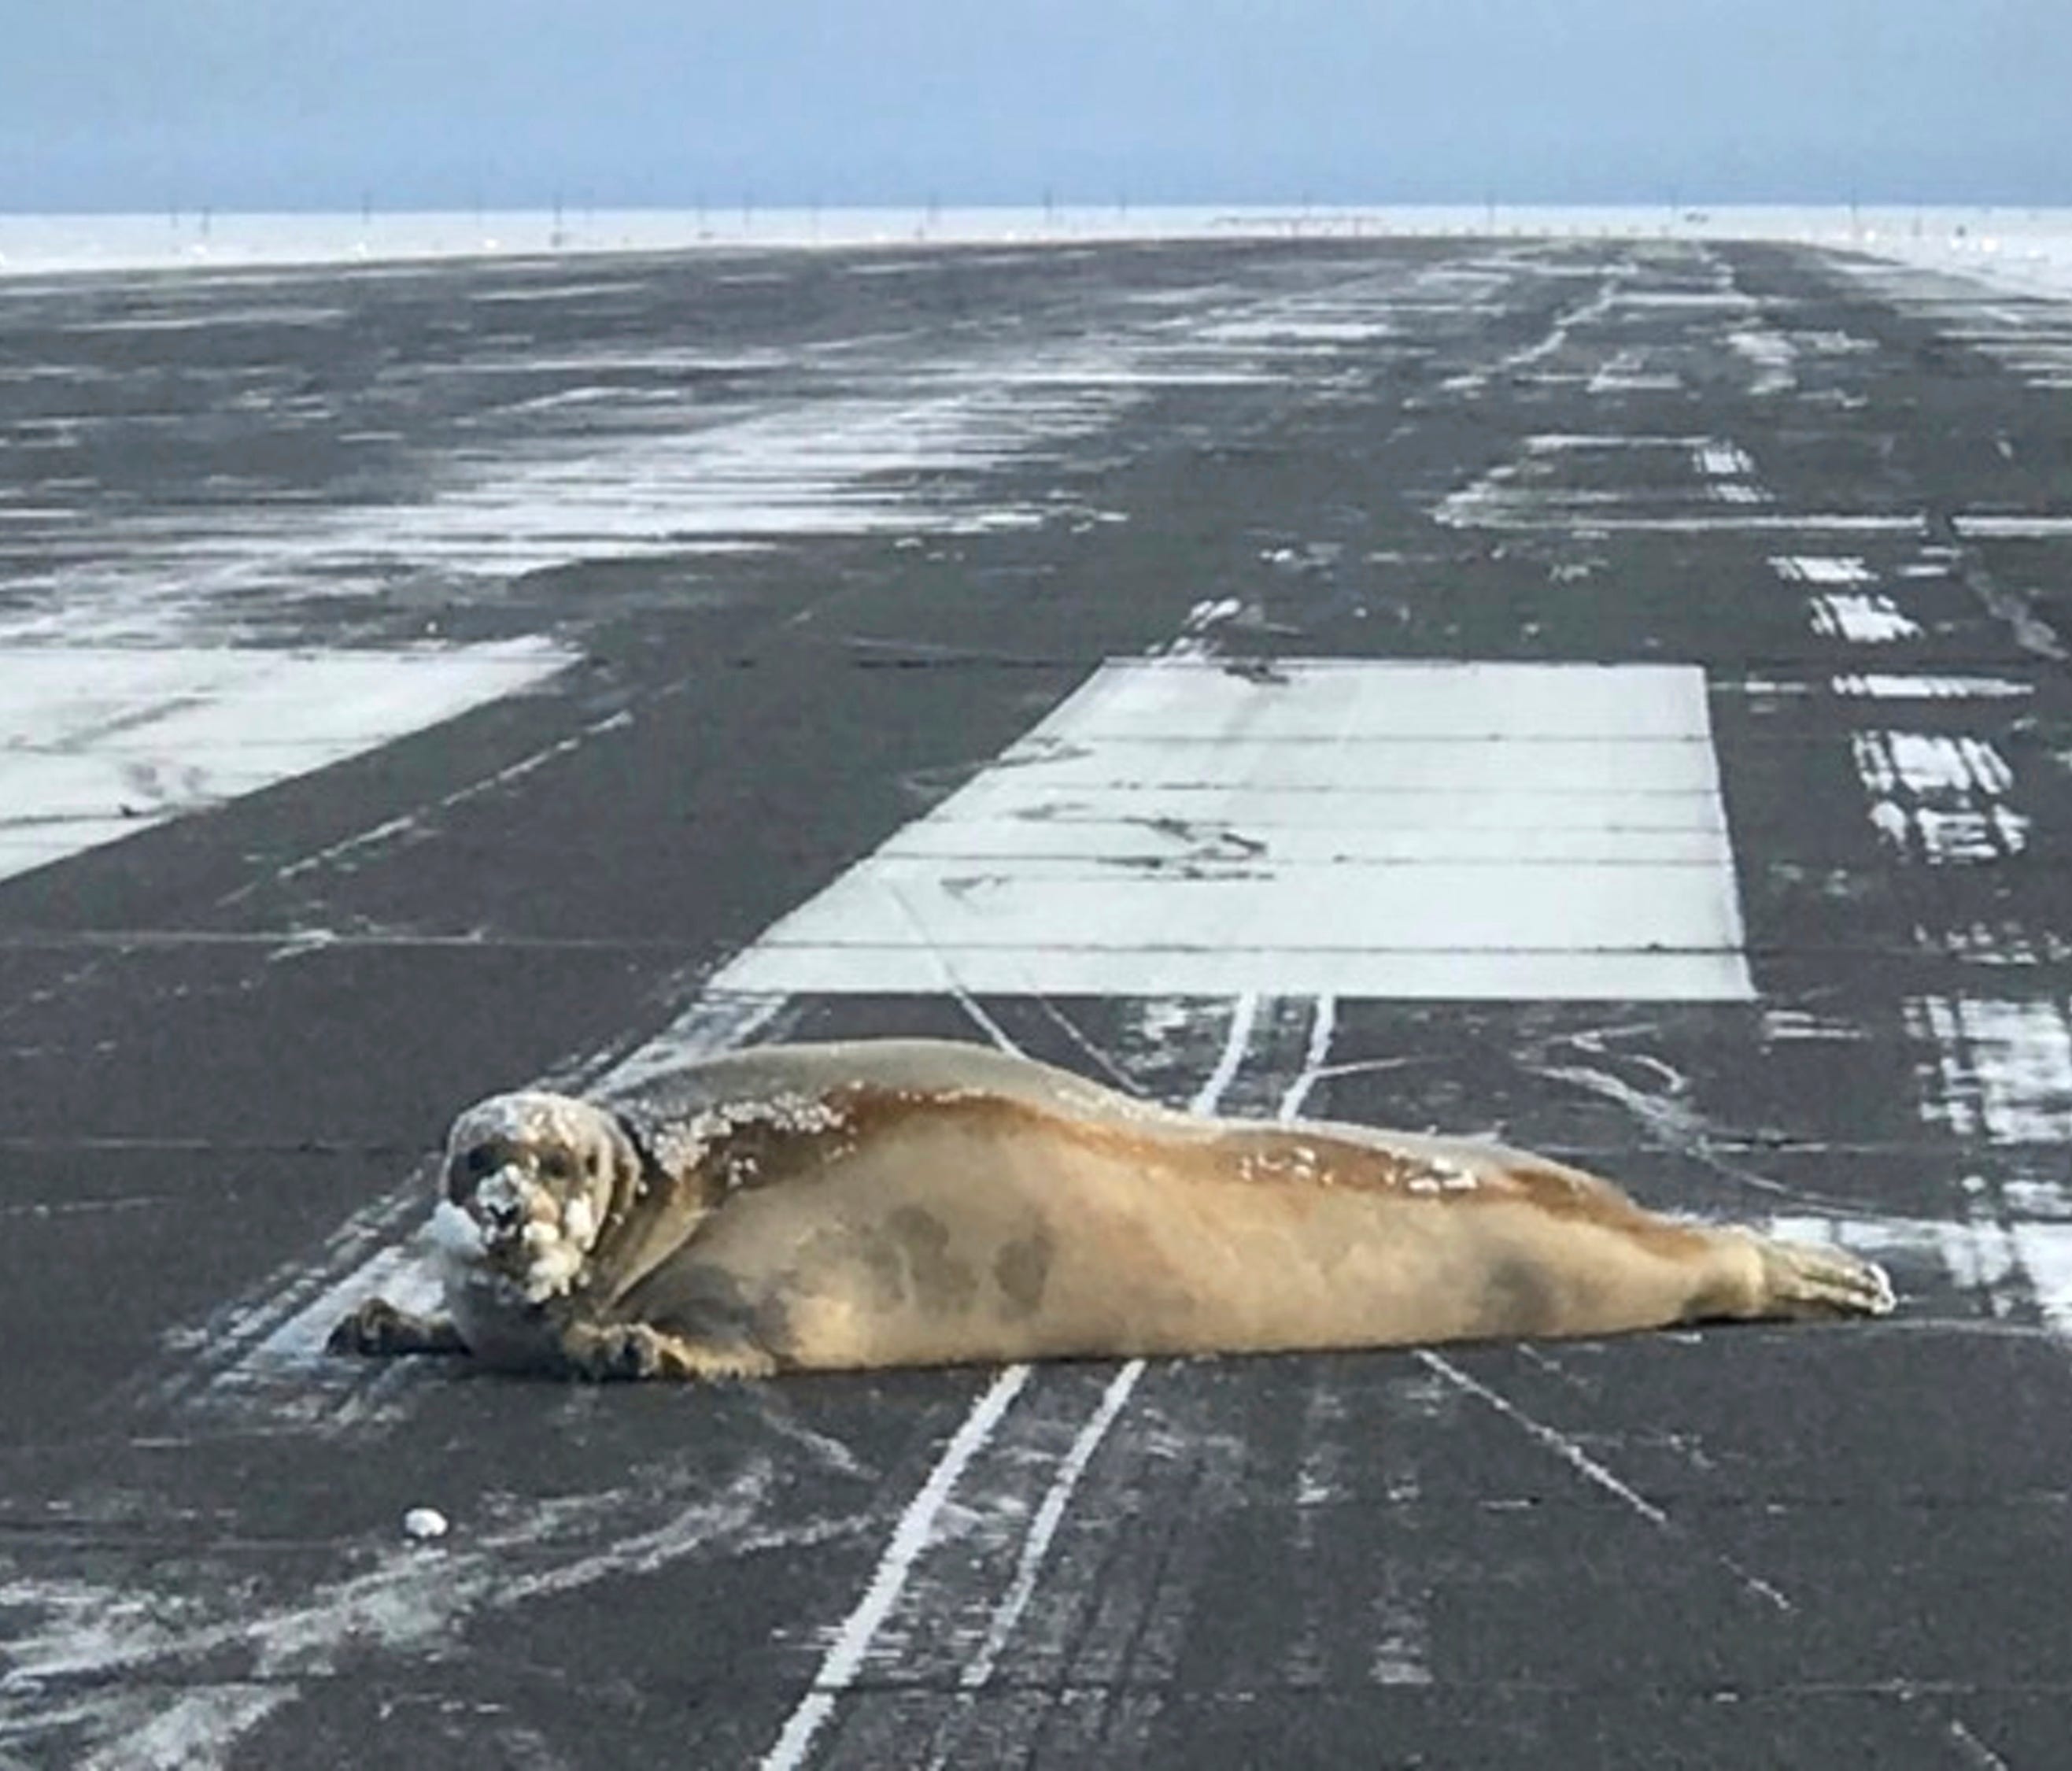 This Oct. 23, 2017, photo provided by Scott Babcock shows a seal that wound up on the runway at the airport in Utiqiagvik, Alaska. A sled was brought in to remove the seal in the community formerly known as Barrow, Alaska. (Scott Babcock via AP) ORG 